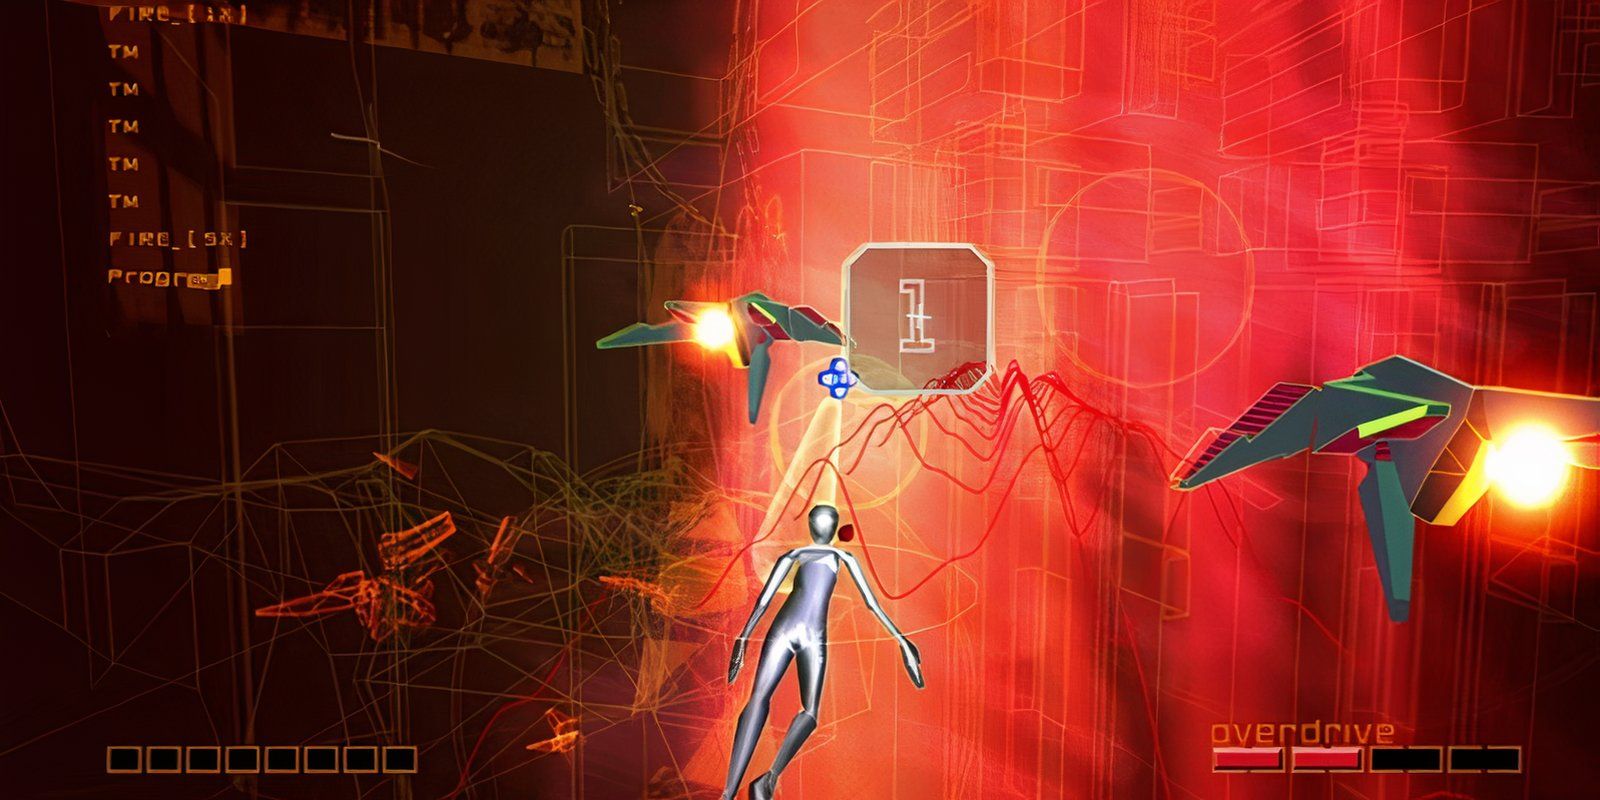 the player character from rez in a digital arena